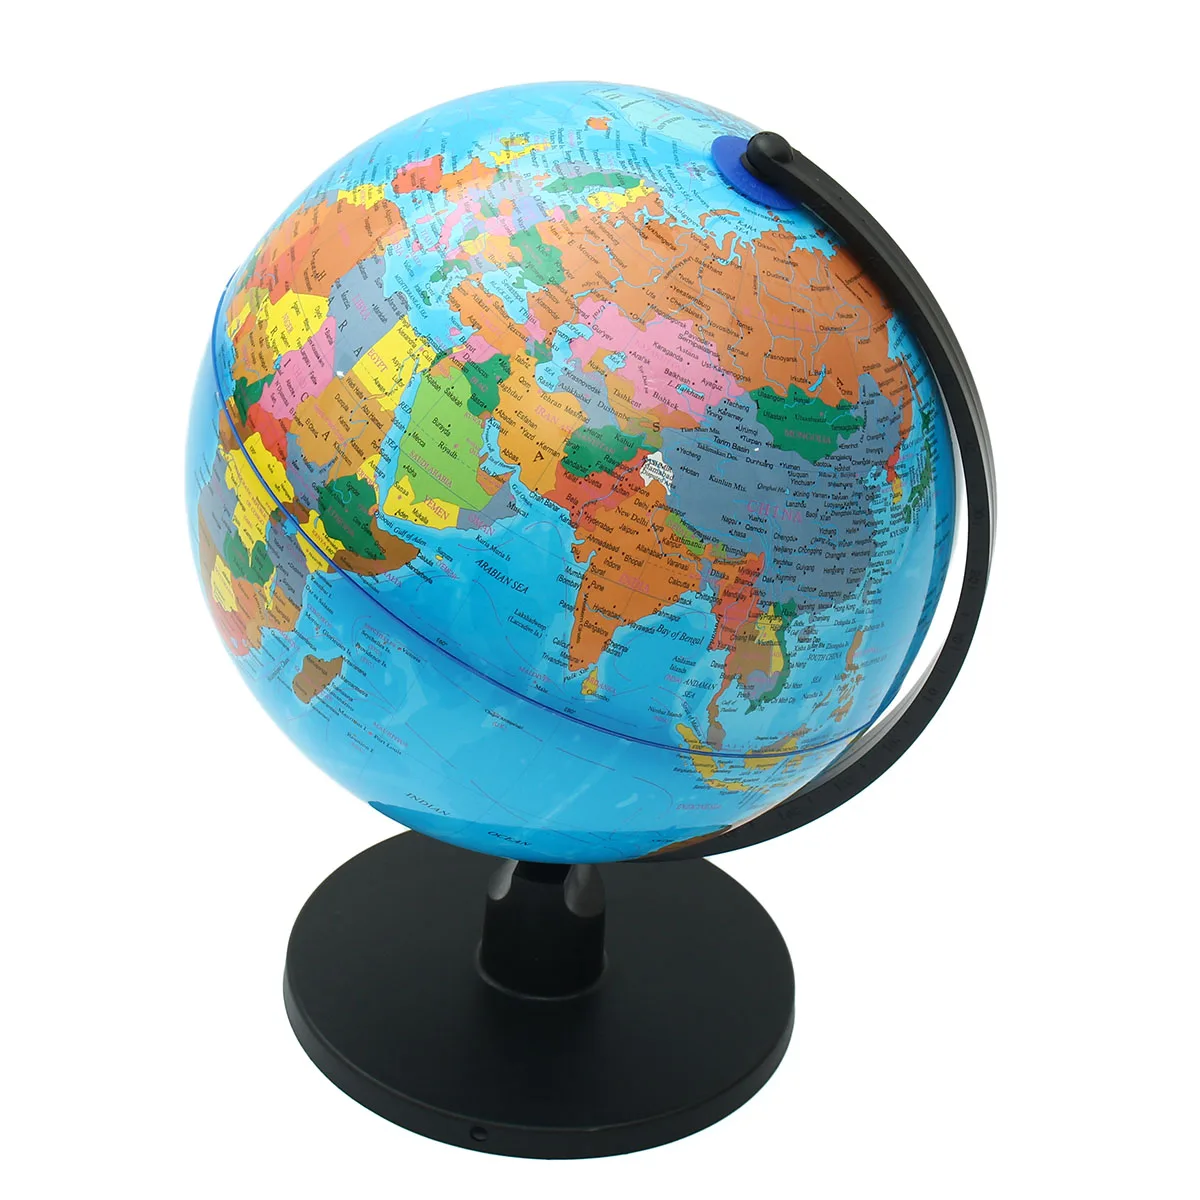 ZJY 25cm World Globe With Swivel Stand Terrestrial Geography Education Toy Map School Supplies Home Decoration Office Ornament